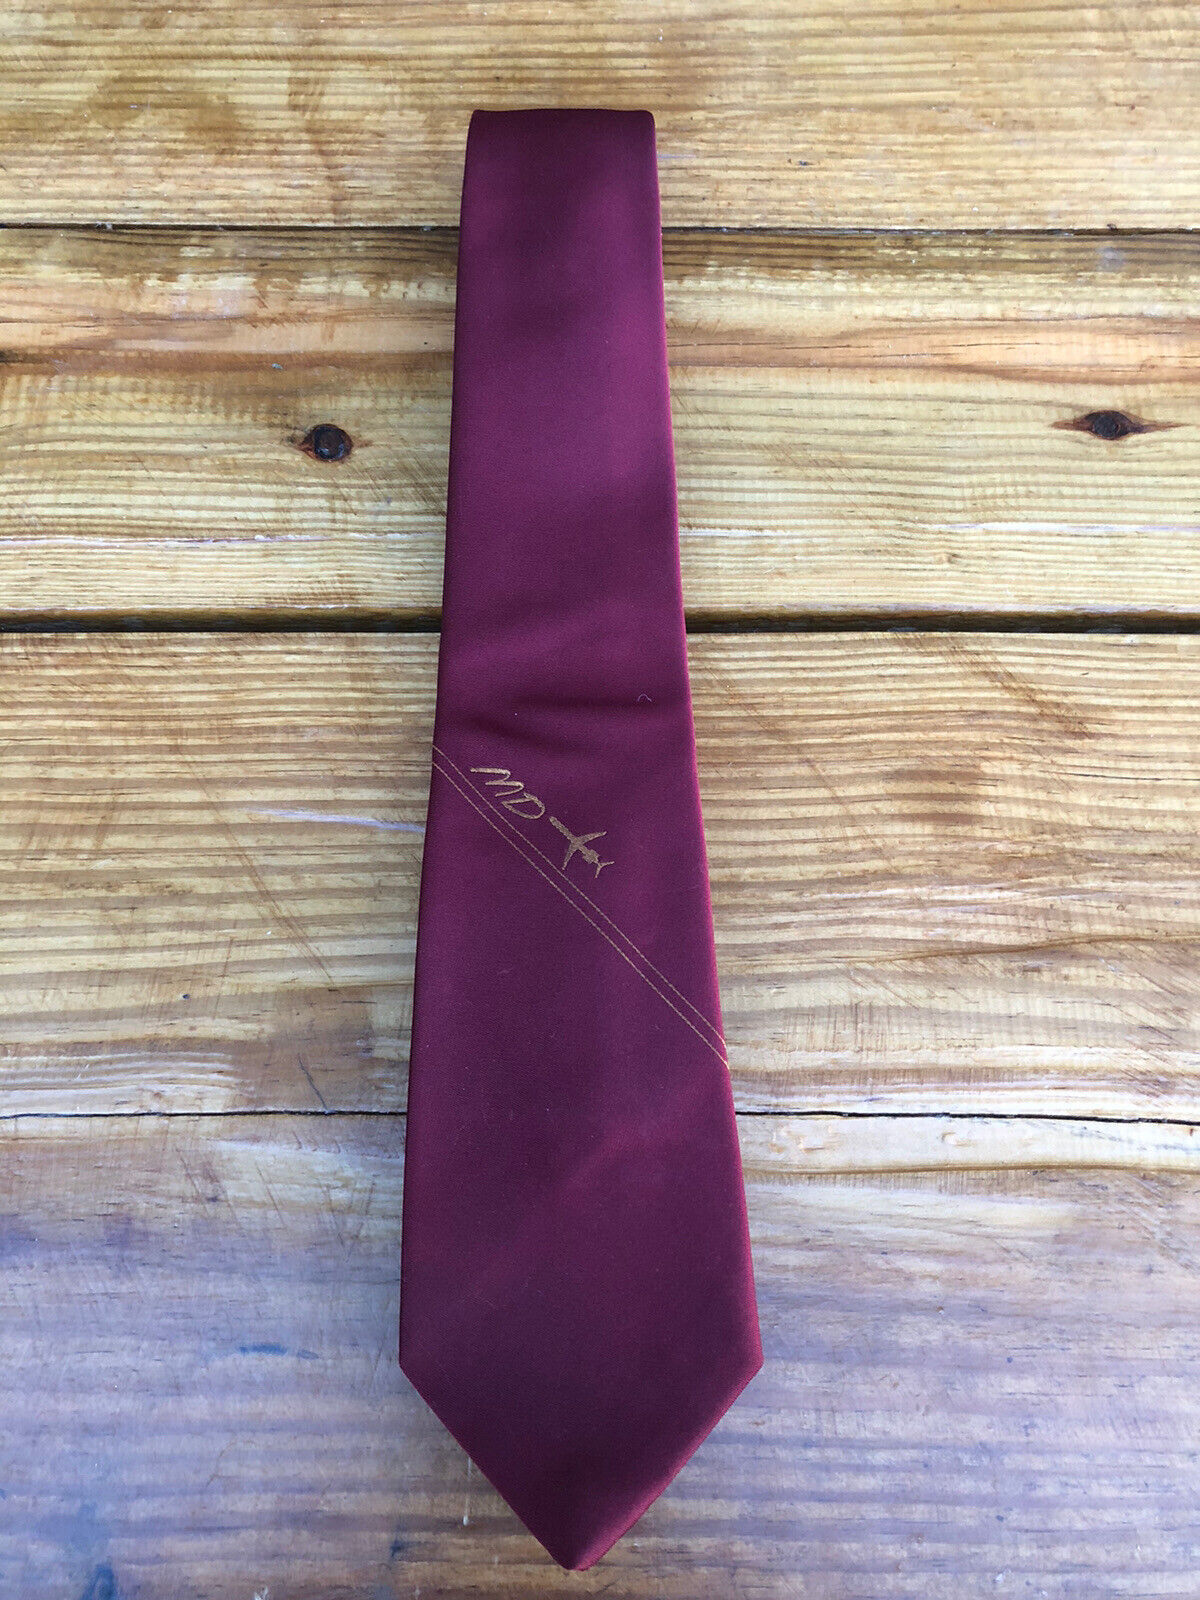 McDonnell Douglas Aircraft Neck Tie, Maroon With Gold Plane Logo